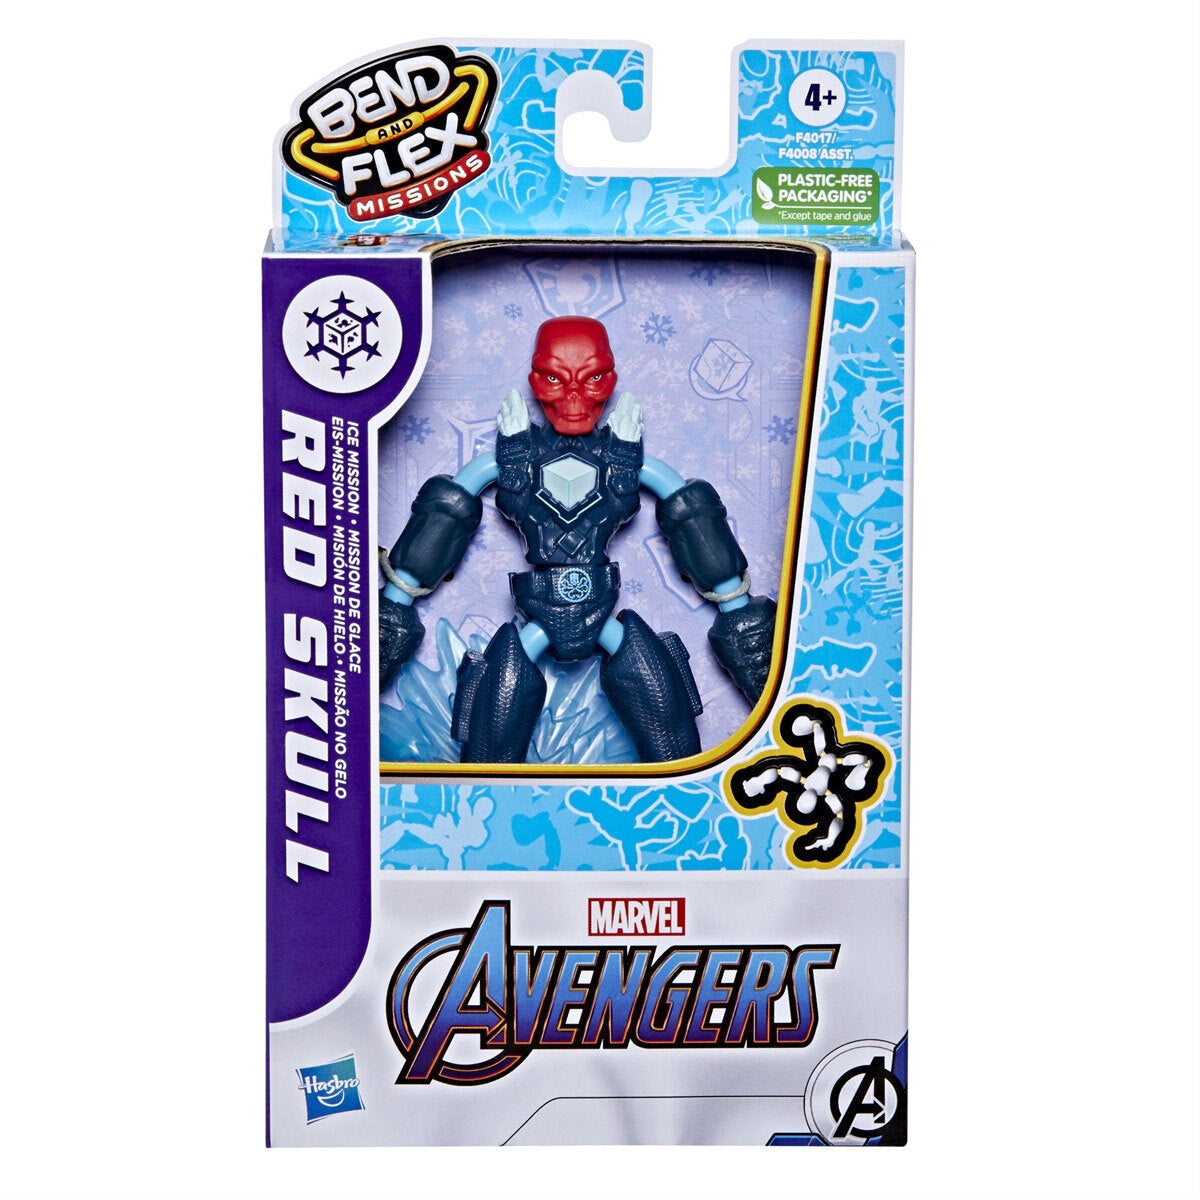 Marvel Avengers Bend and Flex Missions 15cm Figure (Styles Vary - One Supplied)